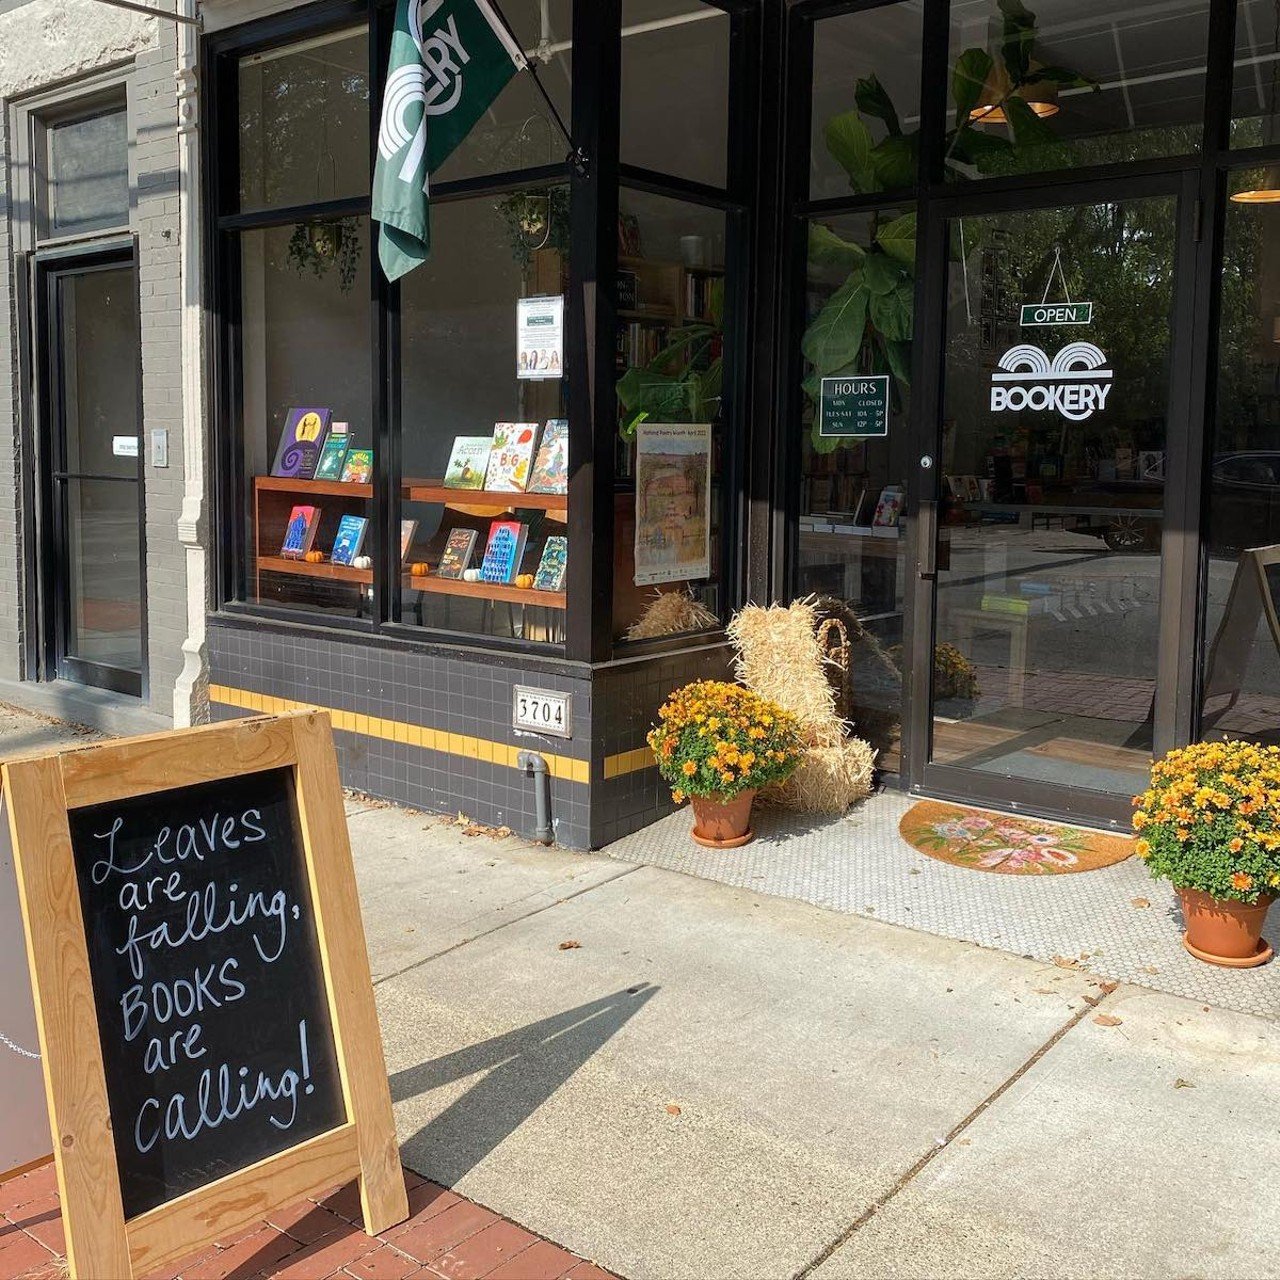 No. 3 Best Bookstore: The Bookery
3704 Eastern Ave., Columbia Tusculum